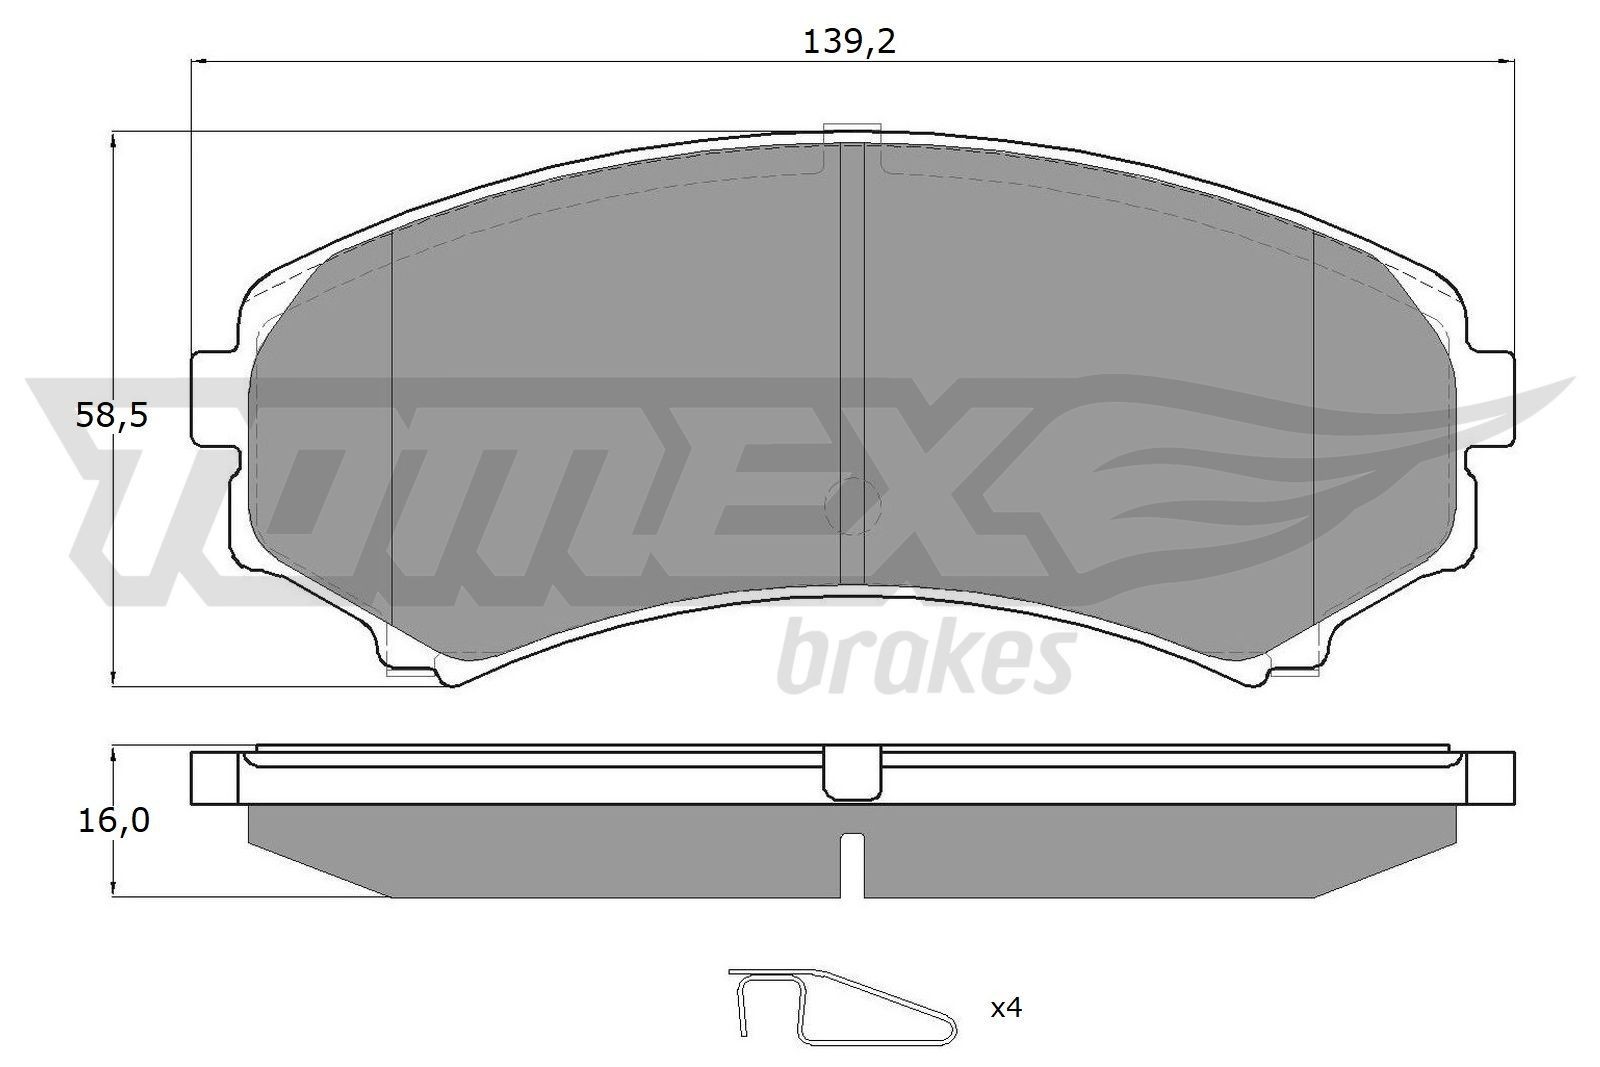 15-33 TOMEX brakes Front Axle, with acoustic wear warning, with accessories Height: 58,5mm, Width: 139,2mm, Thickness: 16mm Brake pads TX 15-33 buy